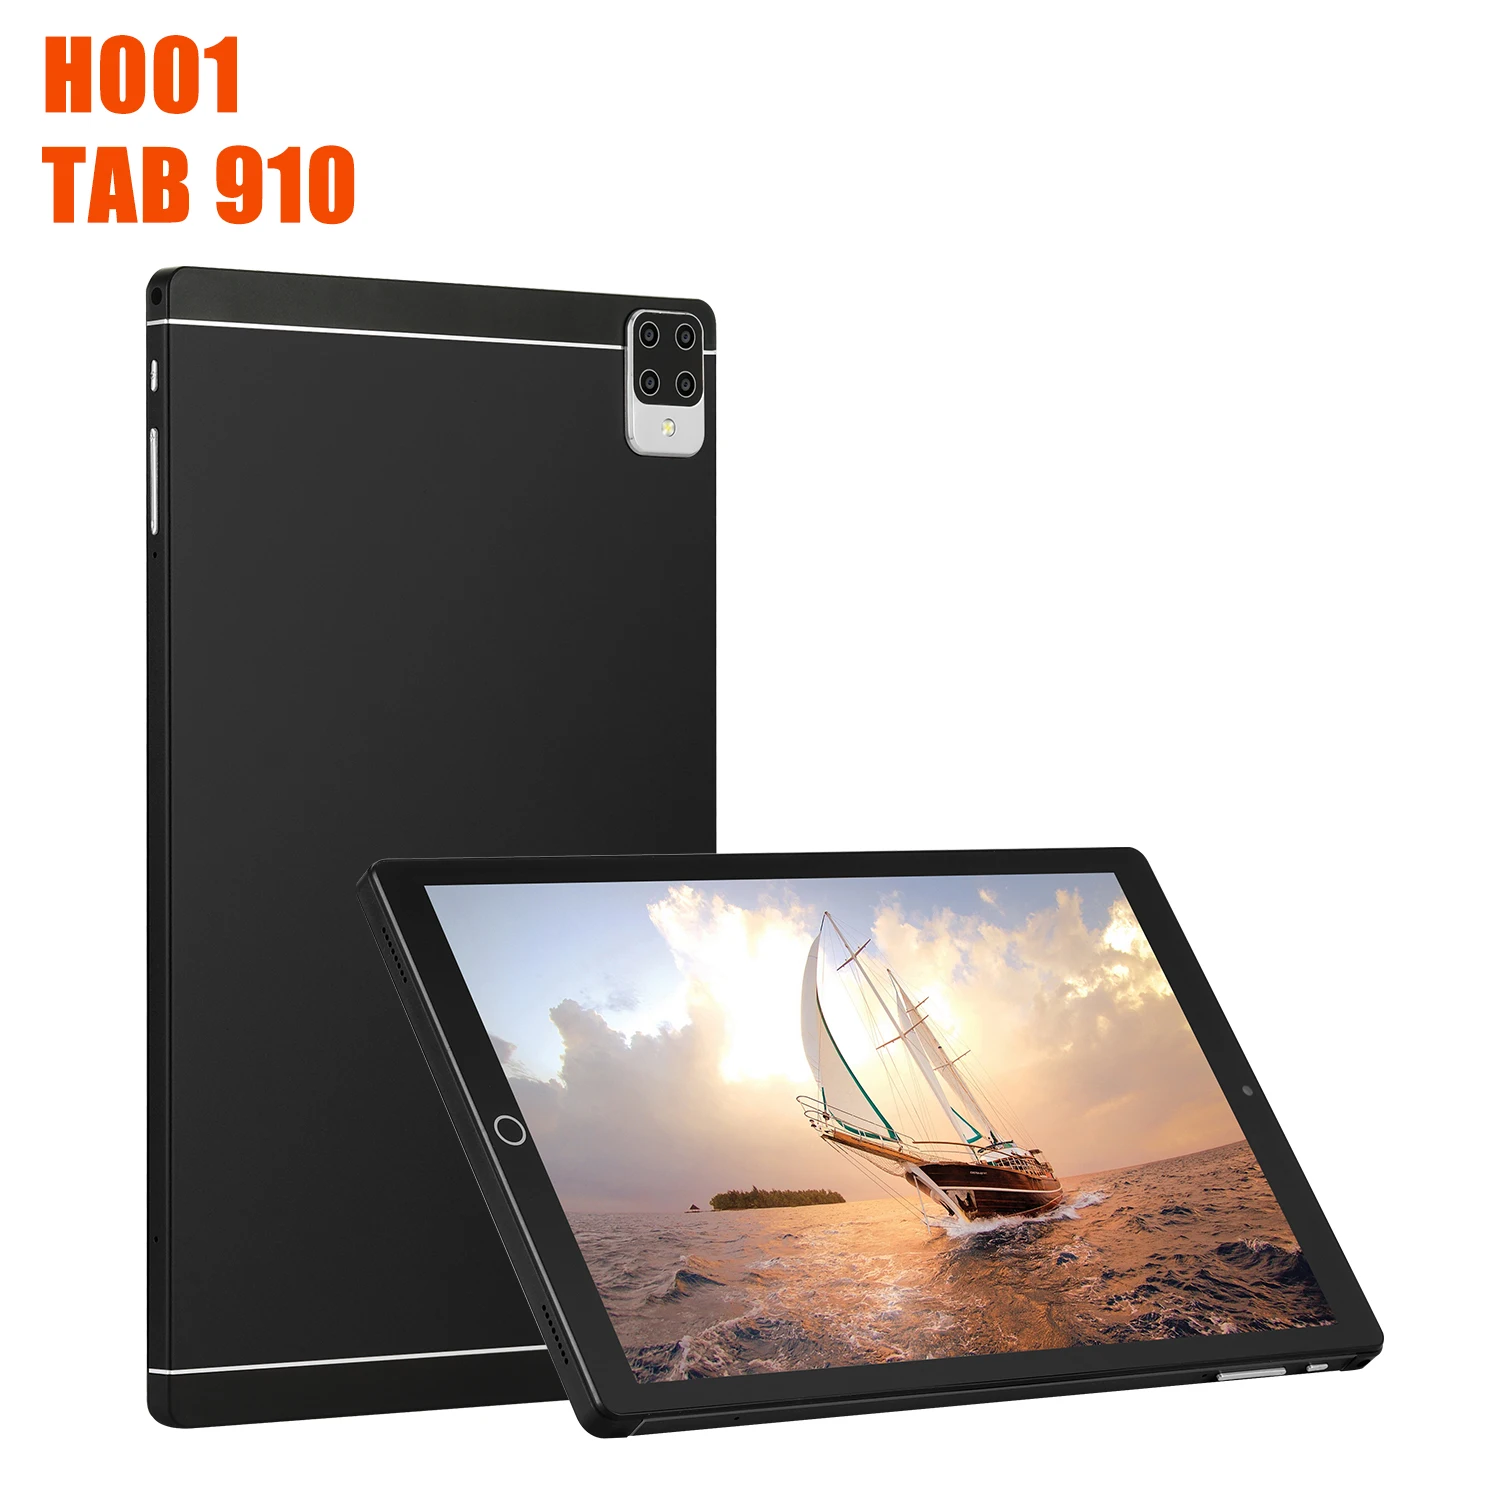 most popular tablet brands Cheap Notebook Google Play WIFI Android Tablet WPS Office 10 Inch Tablet 16MP+32MP Camera Laptop GPS Android10.0 TAB910 Pad Pro cheap note taking tablet Tablets